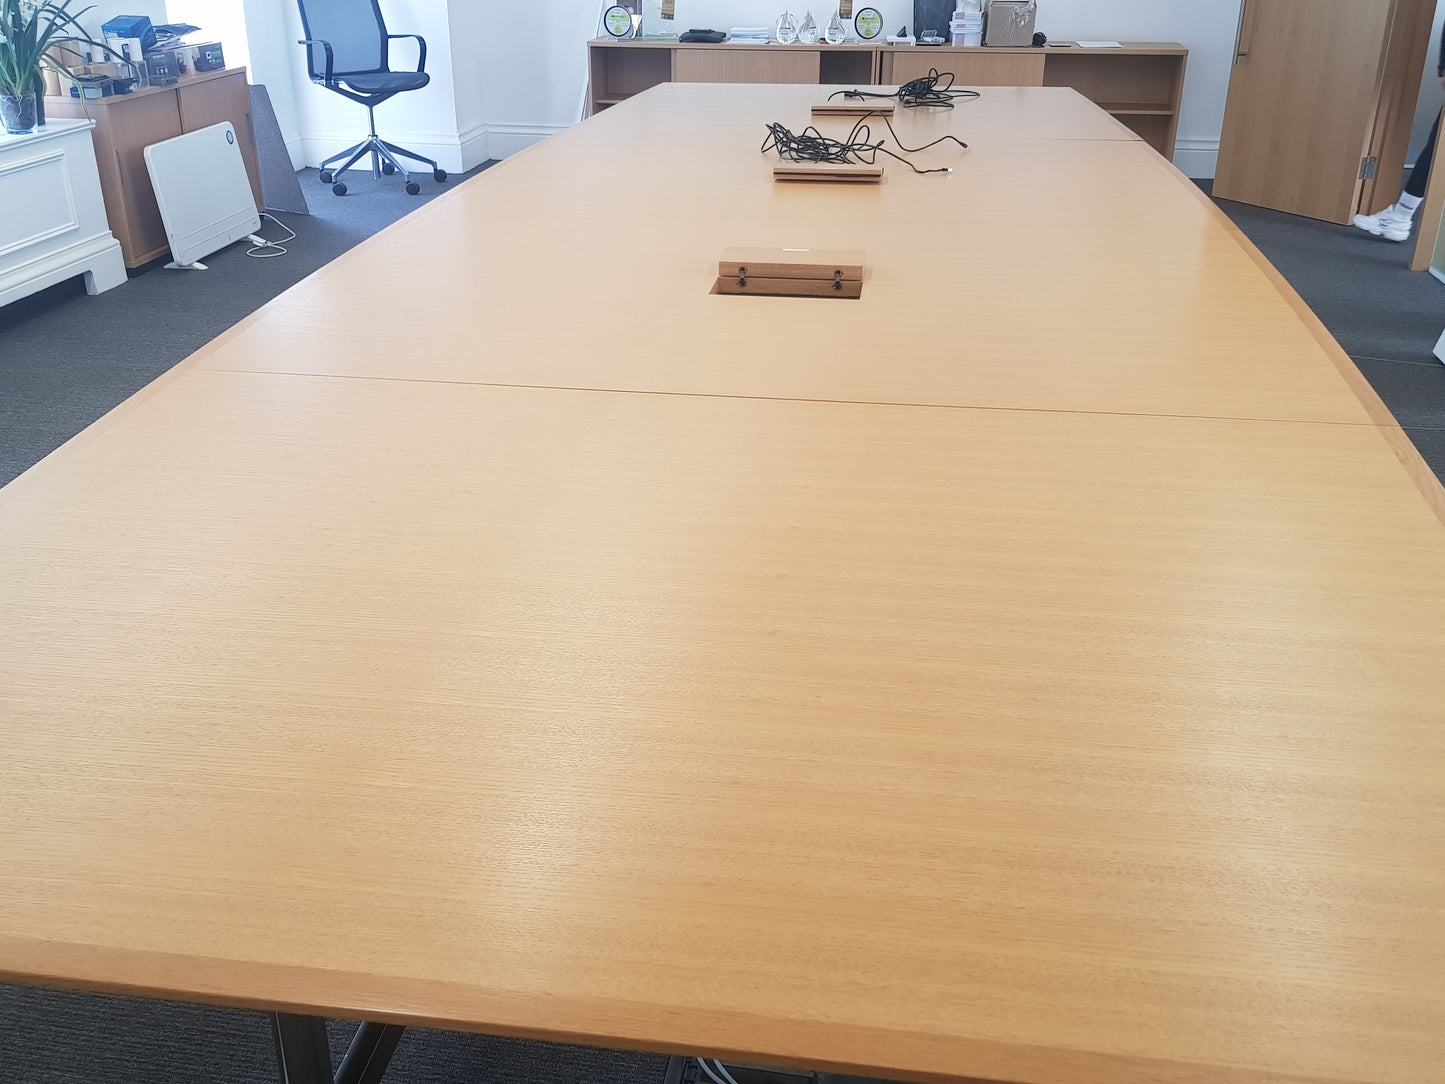 extra large office boardroom table in a room